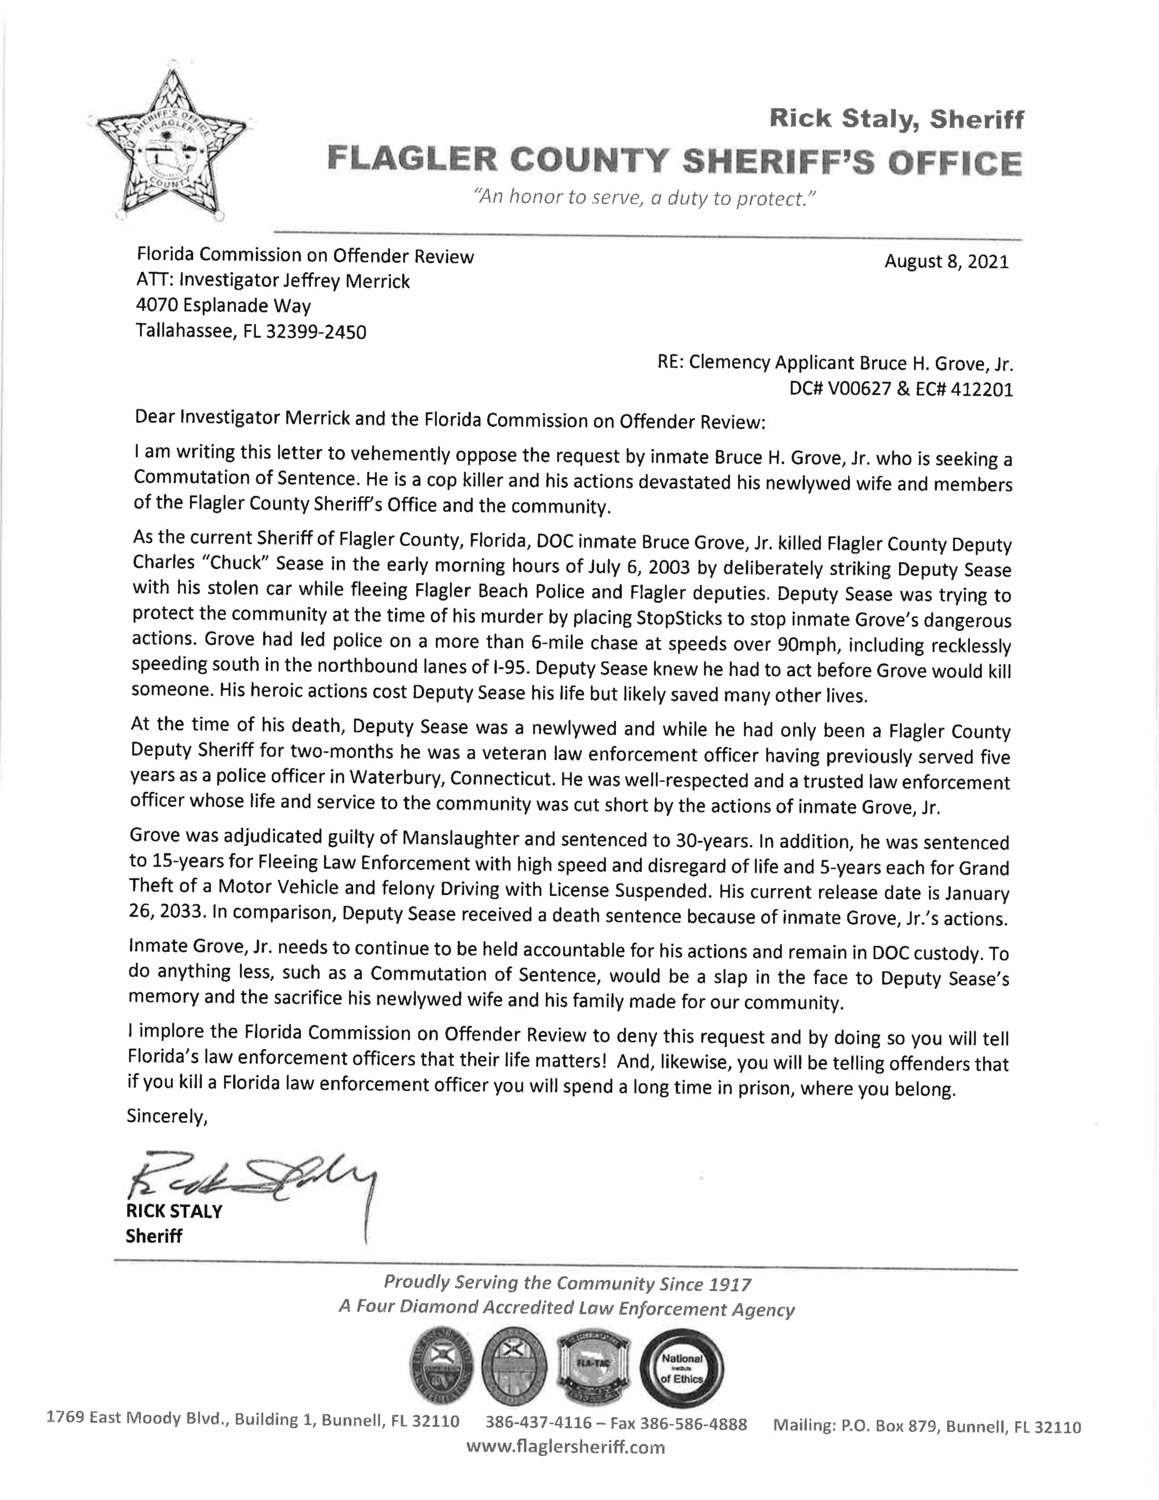 Sheriff Rick Staly's letter to the Florida Commission on Offender Review